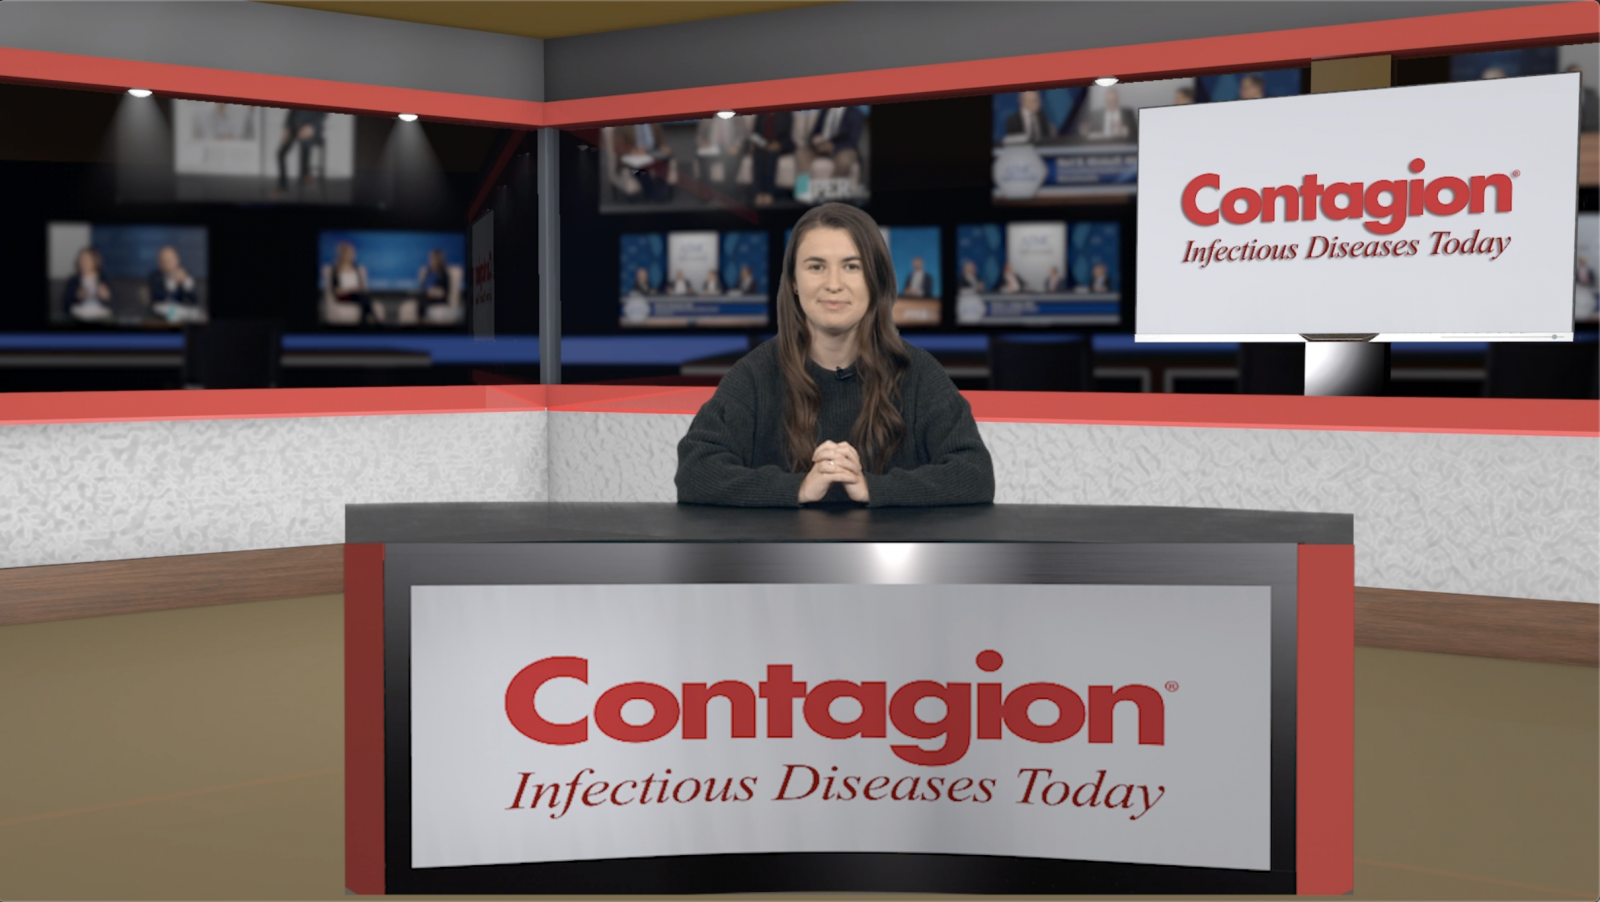 Contagion Live News Network: Coronavirus Updates for March 6, 2020